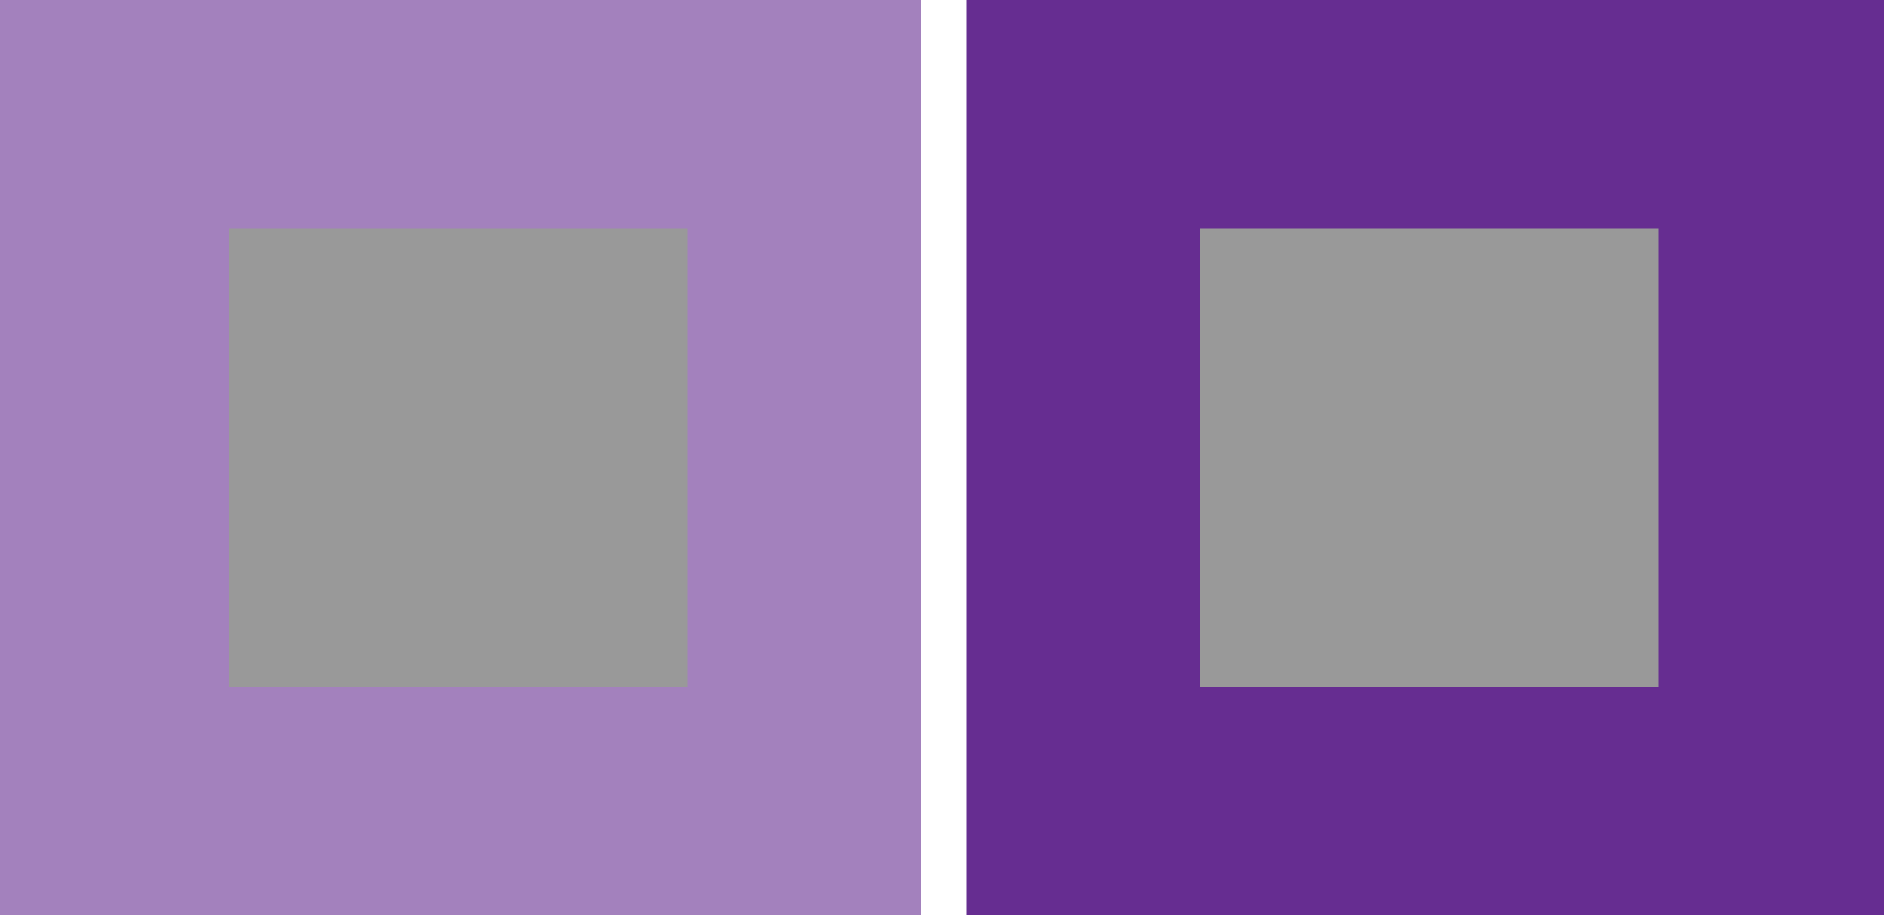 simultaneous contrast hues with gray.png